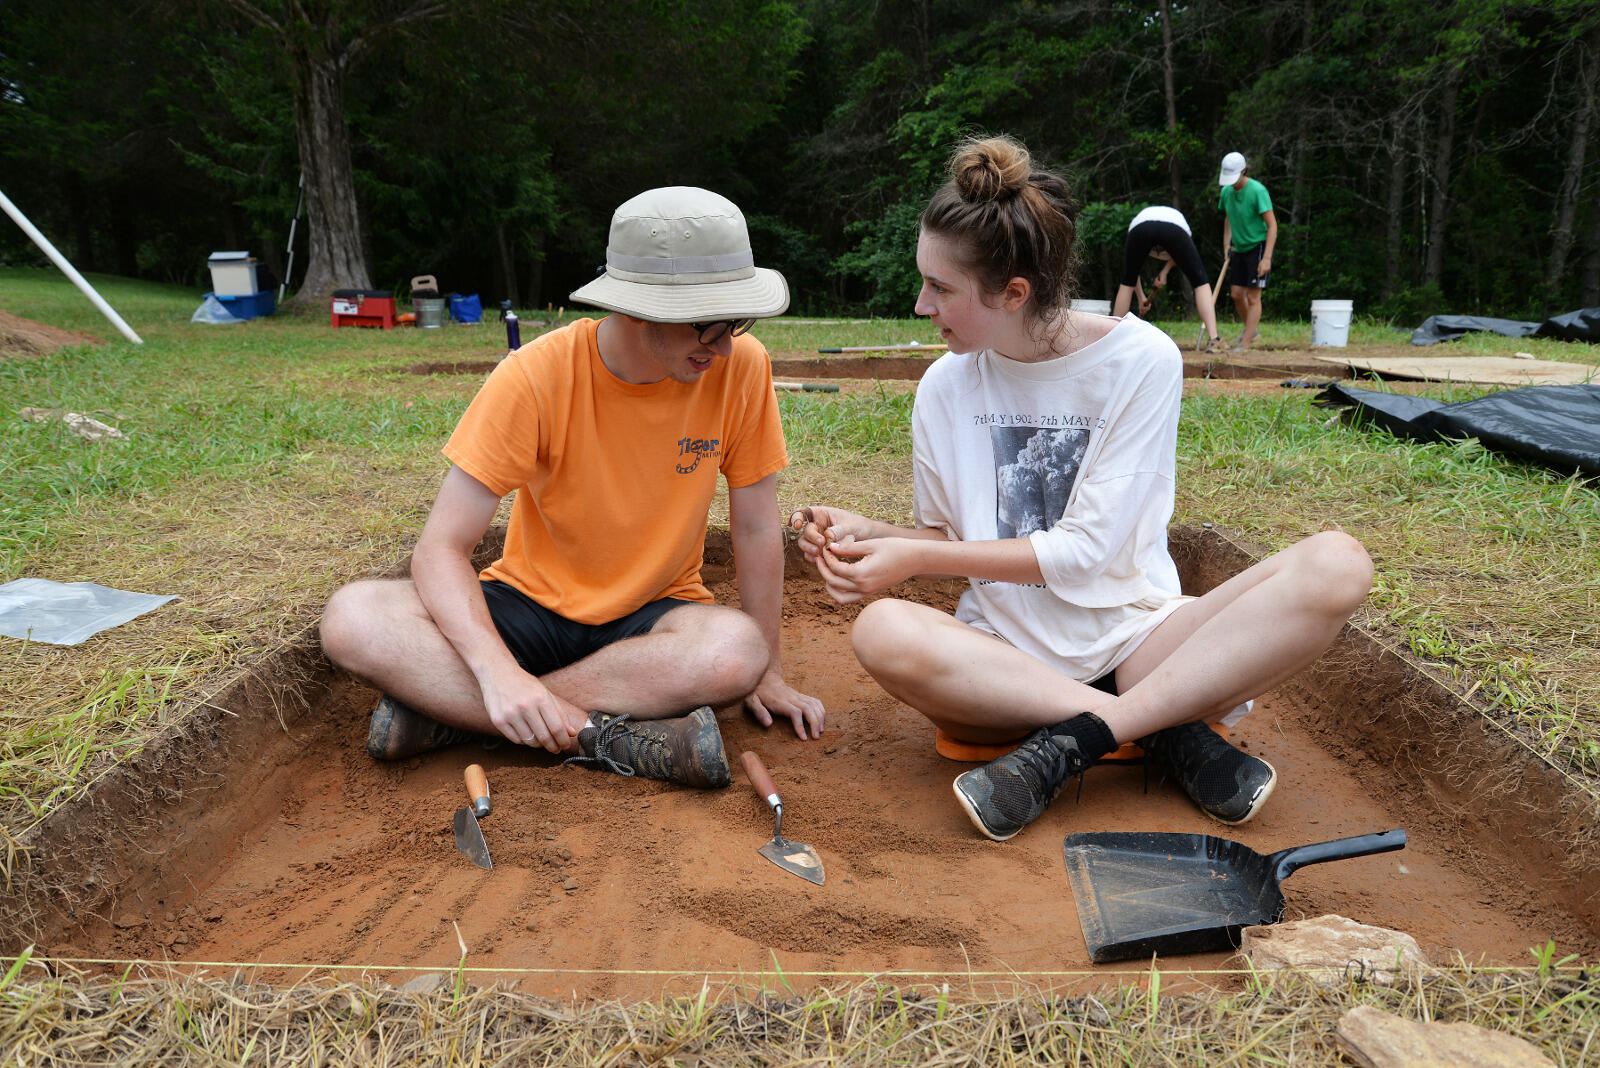 VCU anthropology students Ben Snyder and Marianne Tokarz check out a piece of a pipe stem they discovered while excavating a section of the Fort Germanna/Enchanted Castle site.